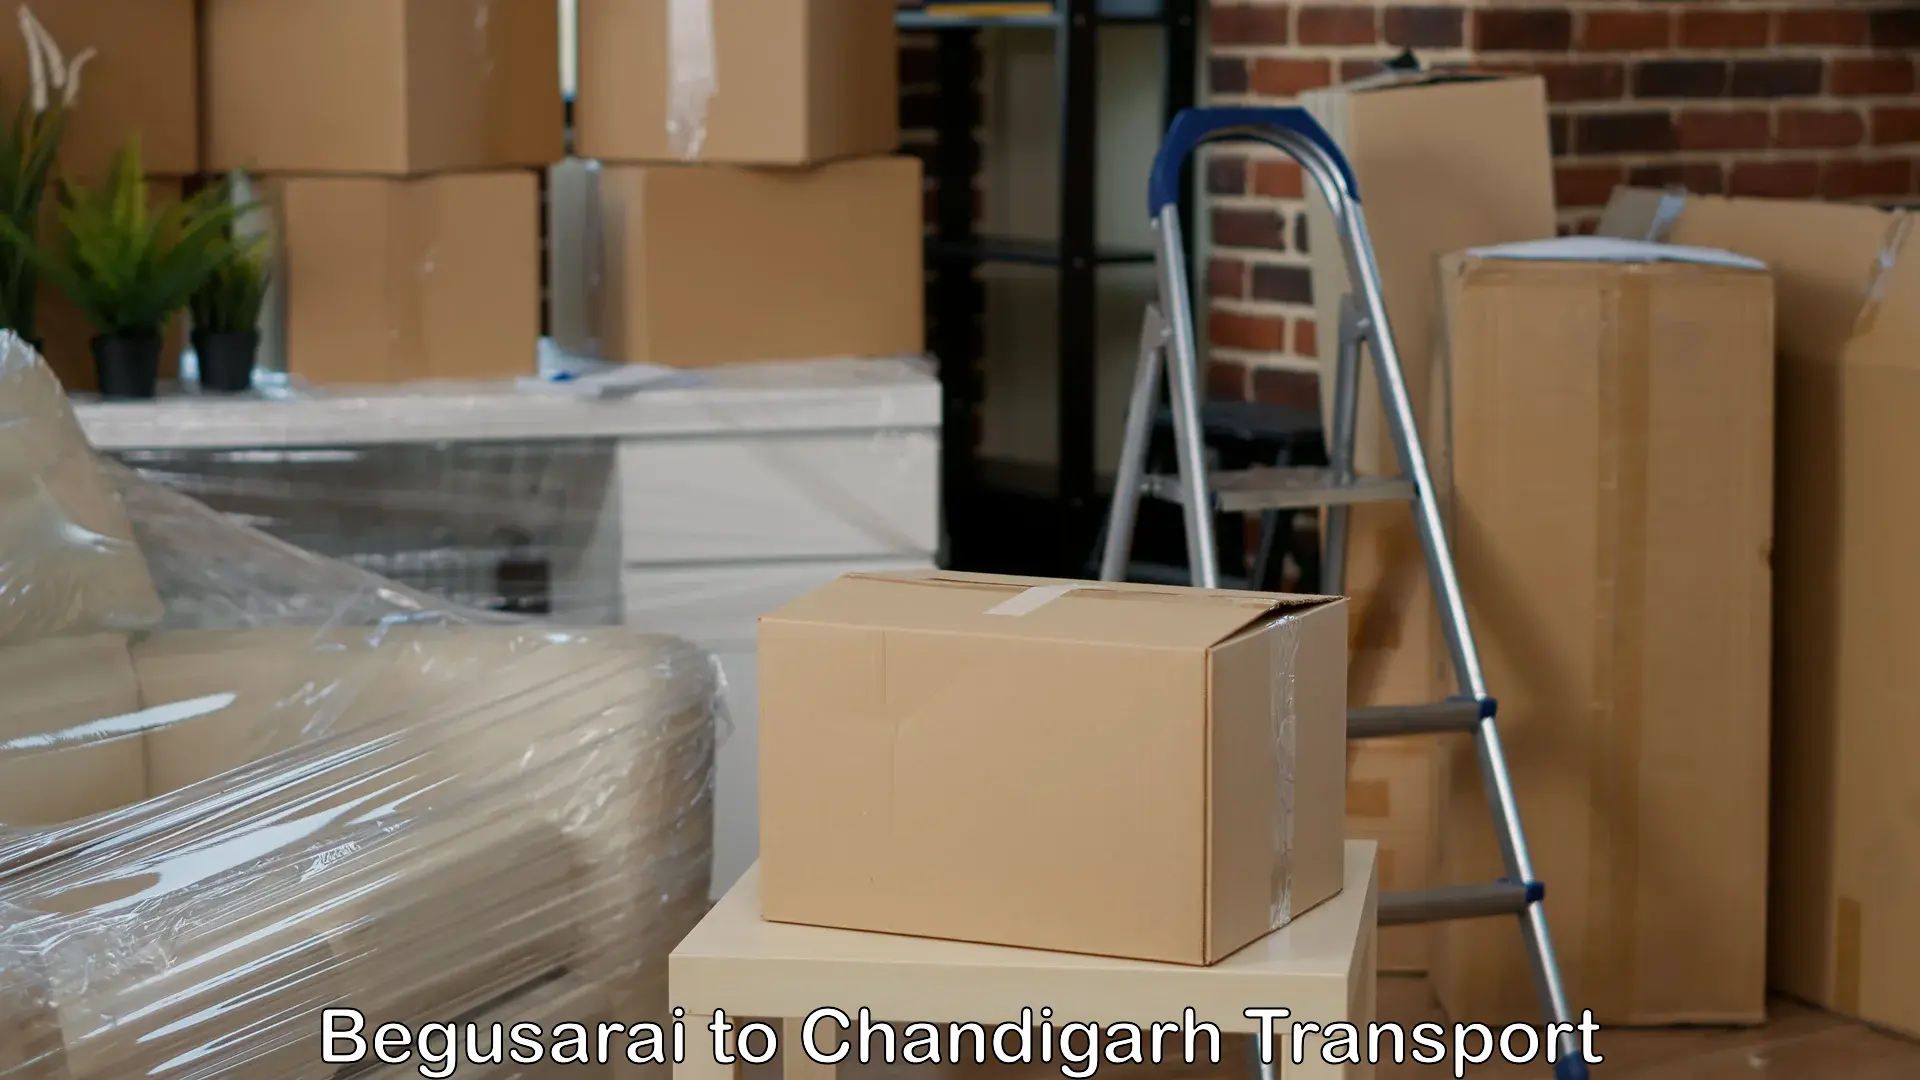 Express transport services Begusarai to Chandigarh